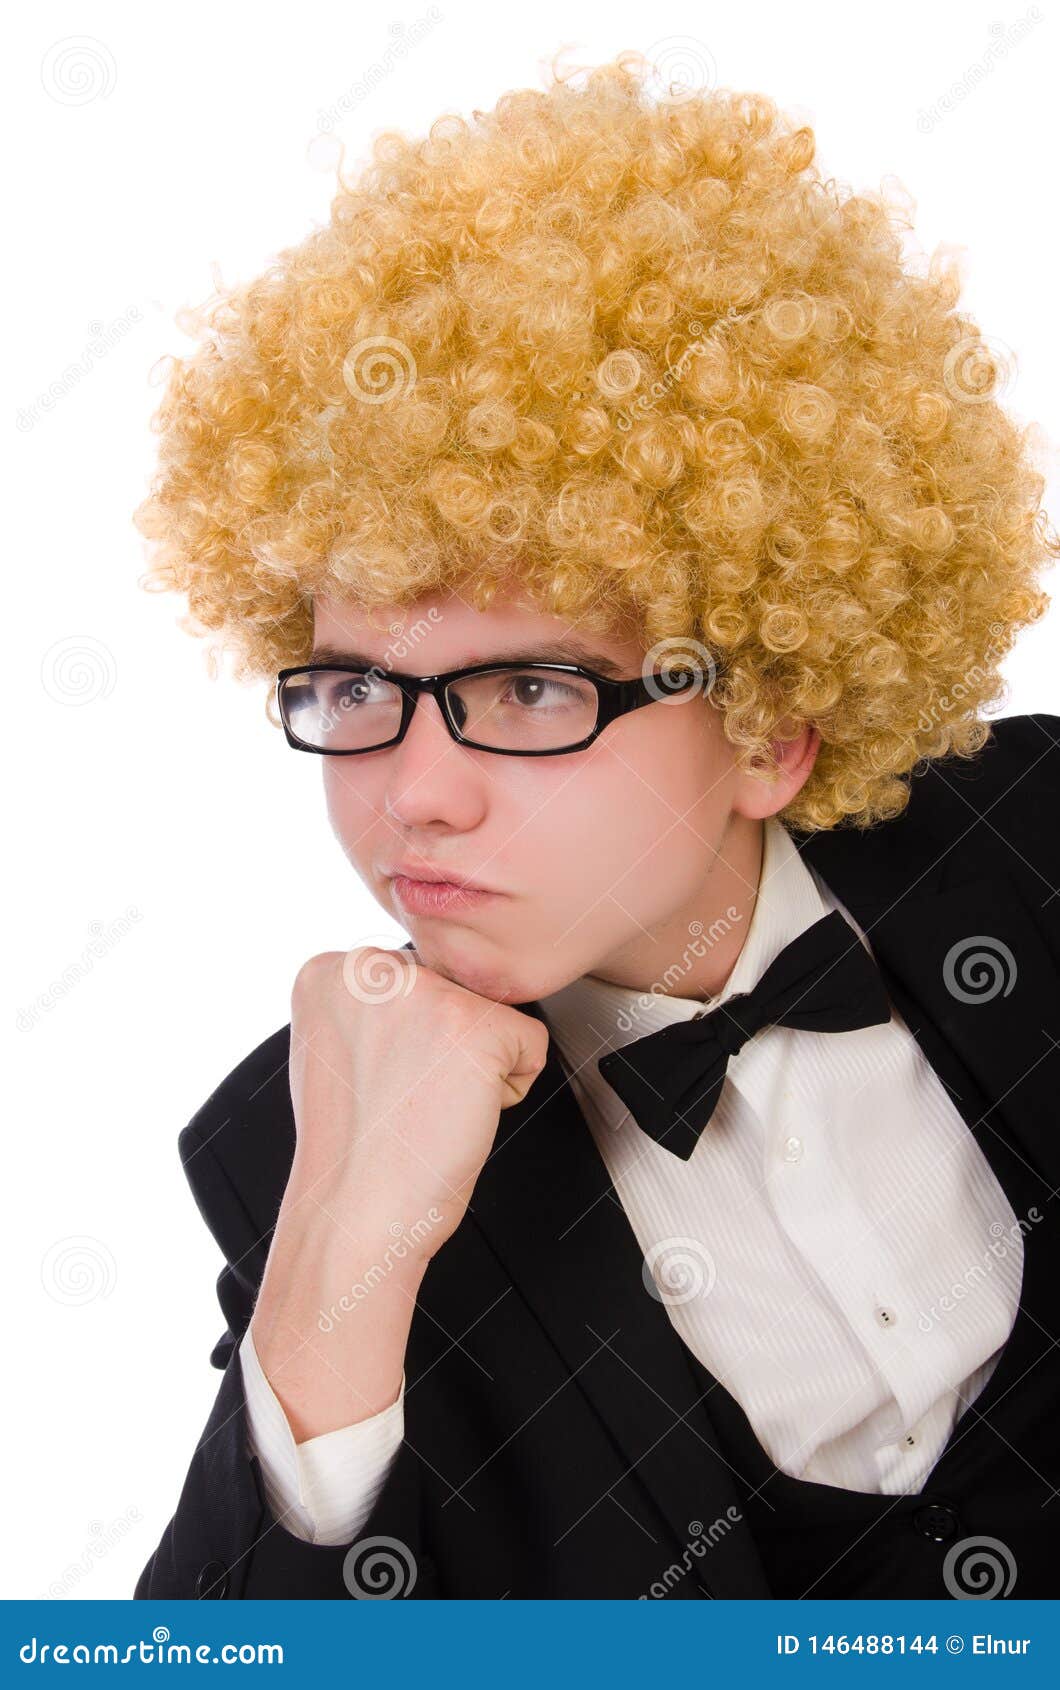 The Funny Man with Curly Hair Style Stock Photo - Image of humorous,  isolated: 146488144